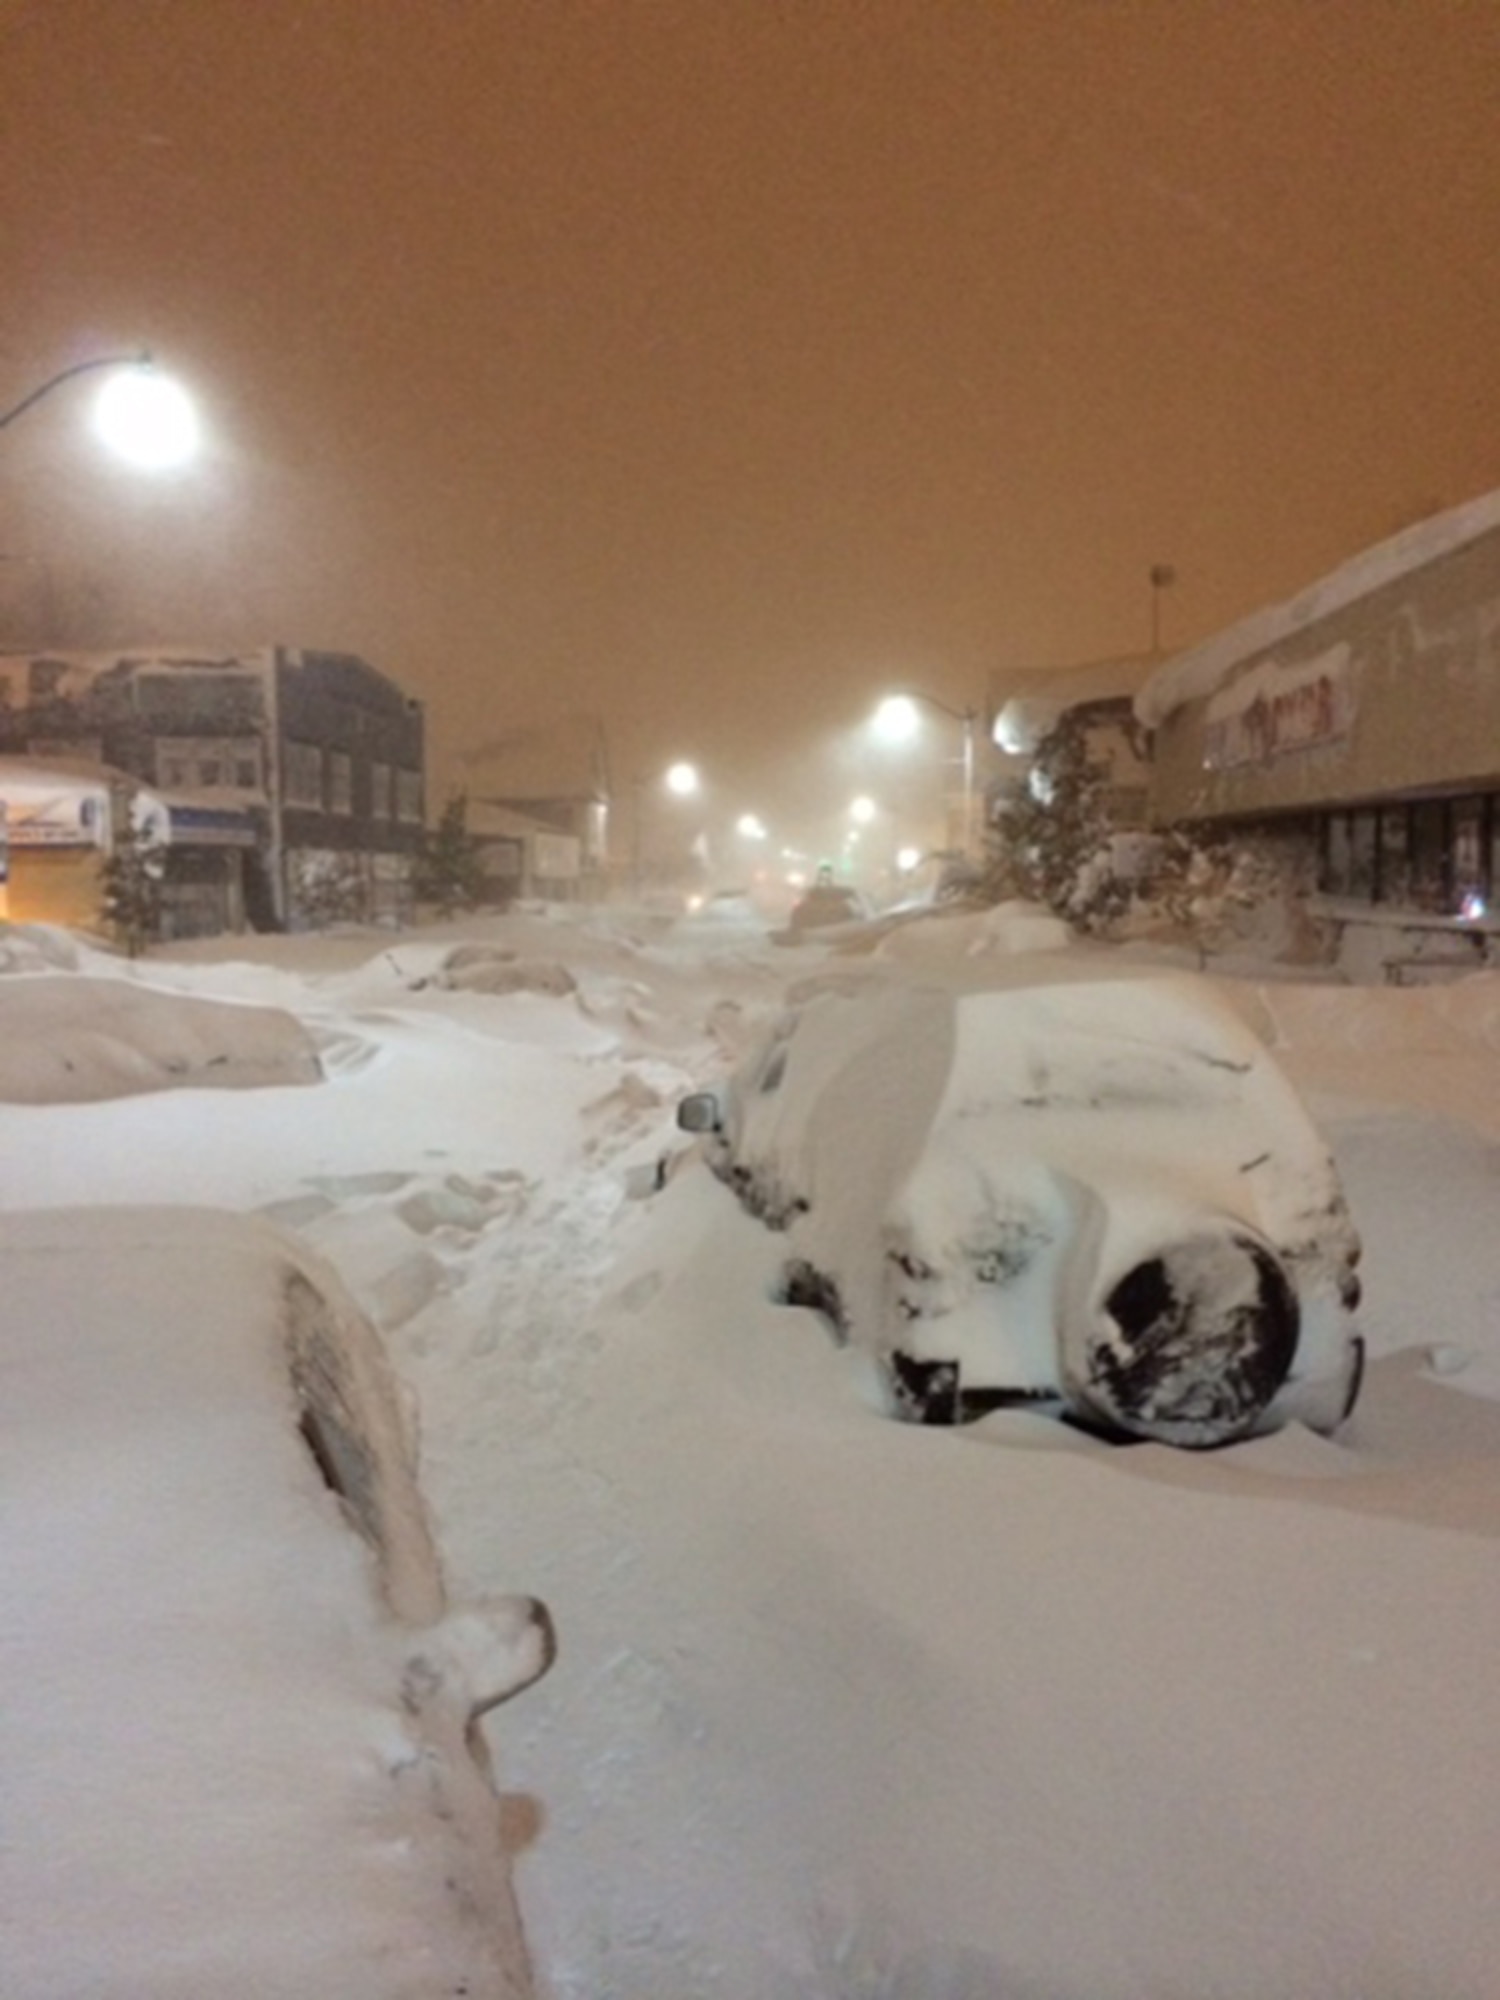 A South Buffalo street is littered with abandoned vehicles and snow at the intersection of Tifft Street and South Park Avenue on November 20, 2014.  Impossible to drive even with four wheel drive vehicles, snowmobiles in some cases substituted for ambulances during a lake effect snow storm that brought close to 8 feet of snow in three days. (Photo by Aaron Mclane)